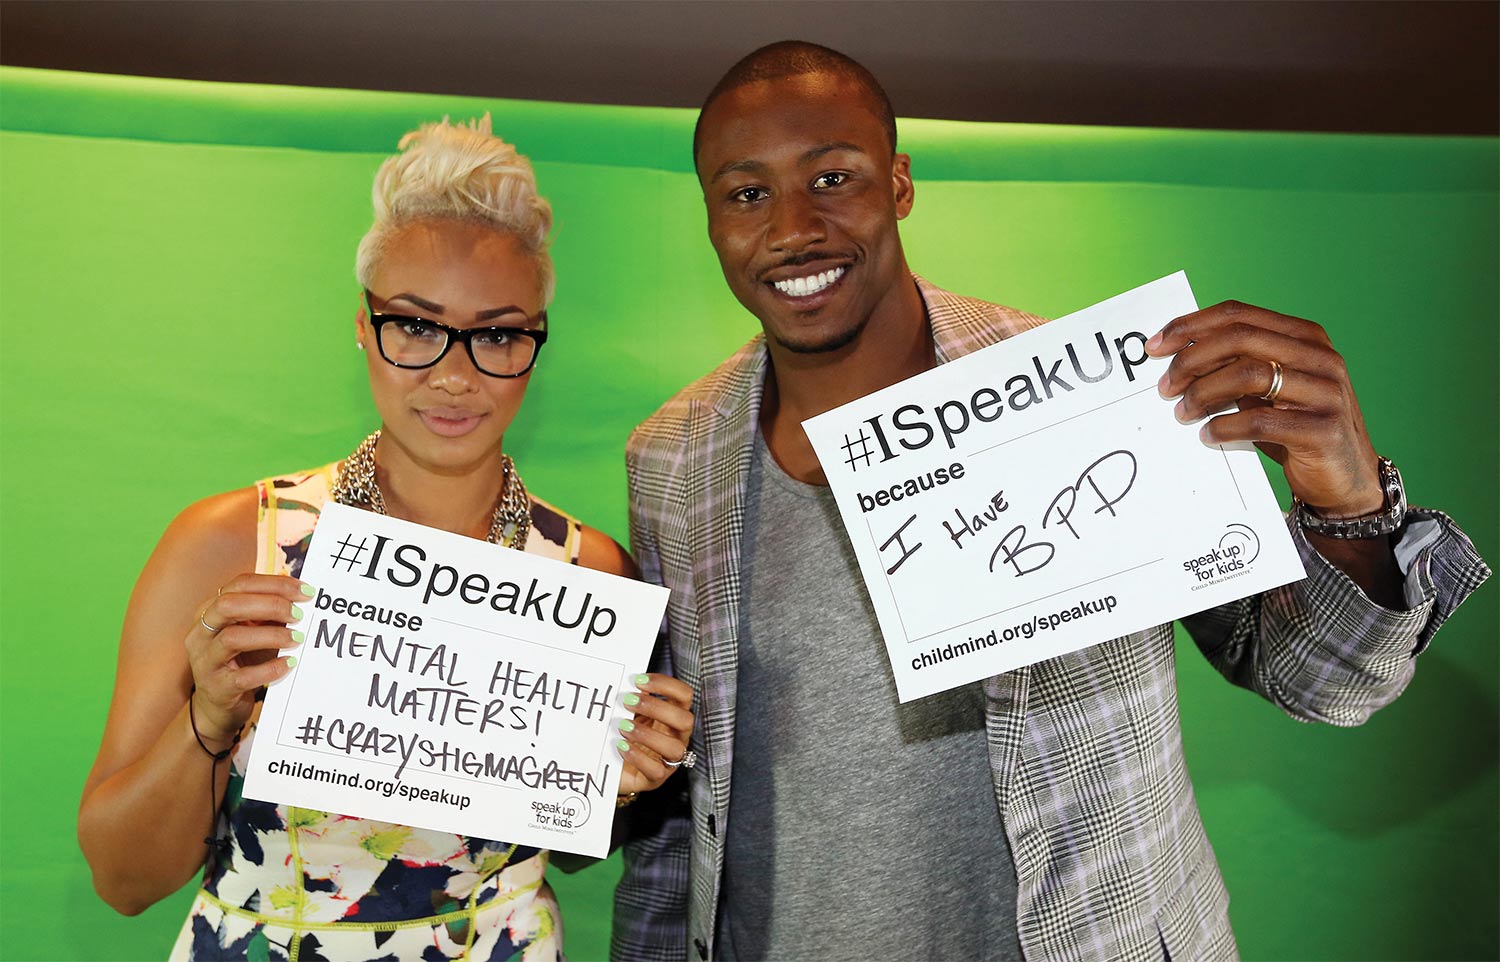 A man and a woman hold up signs against a green background.